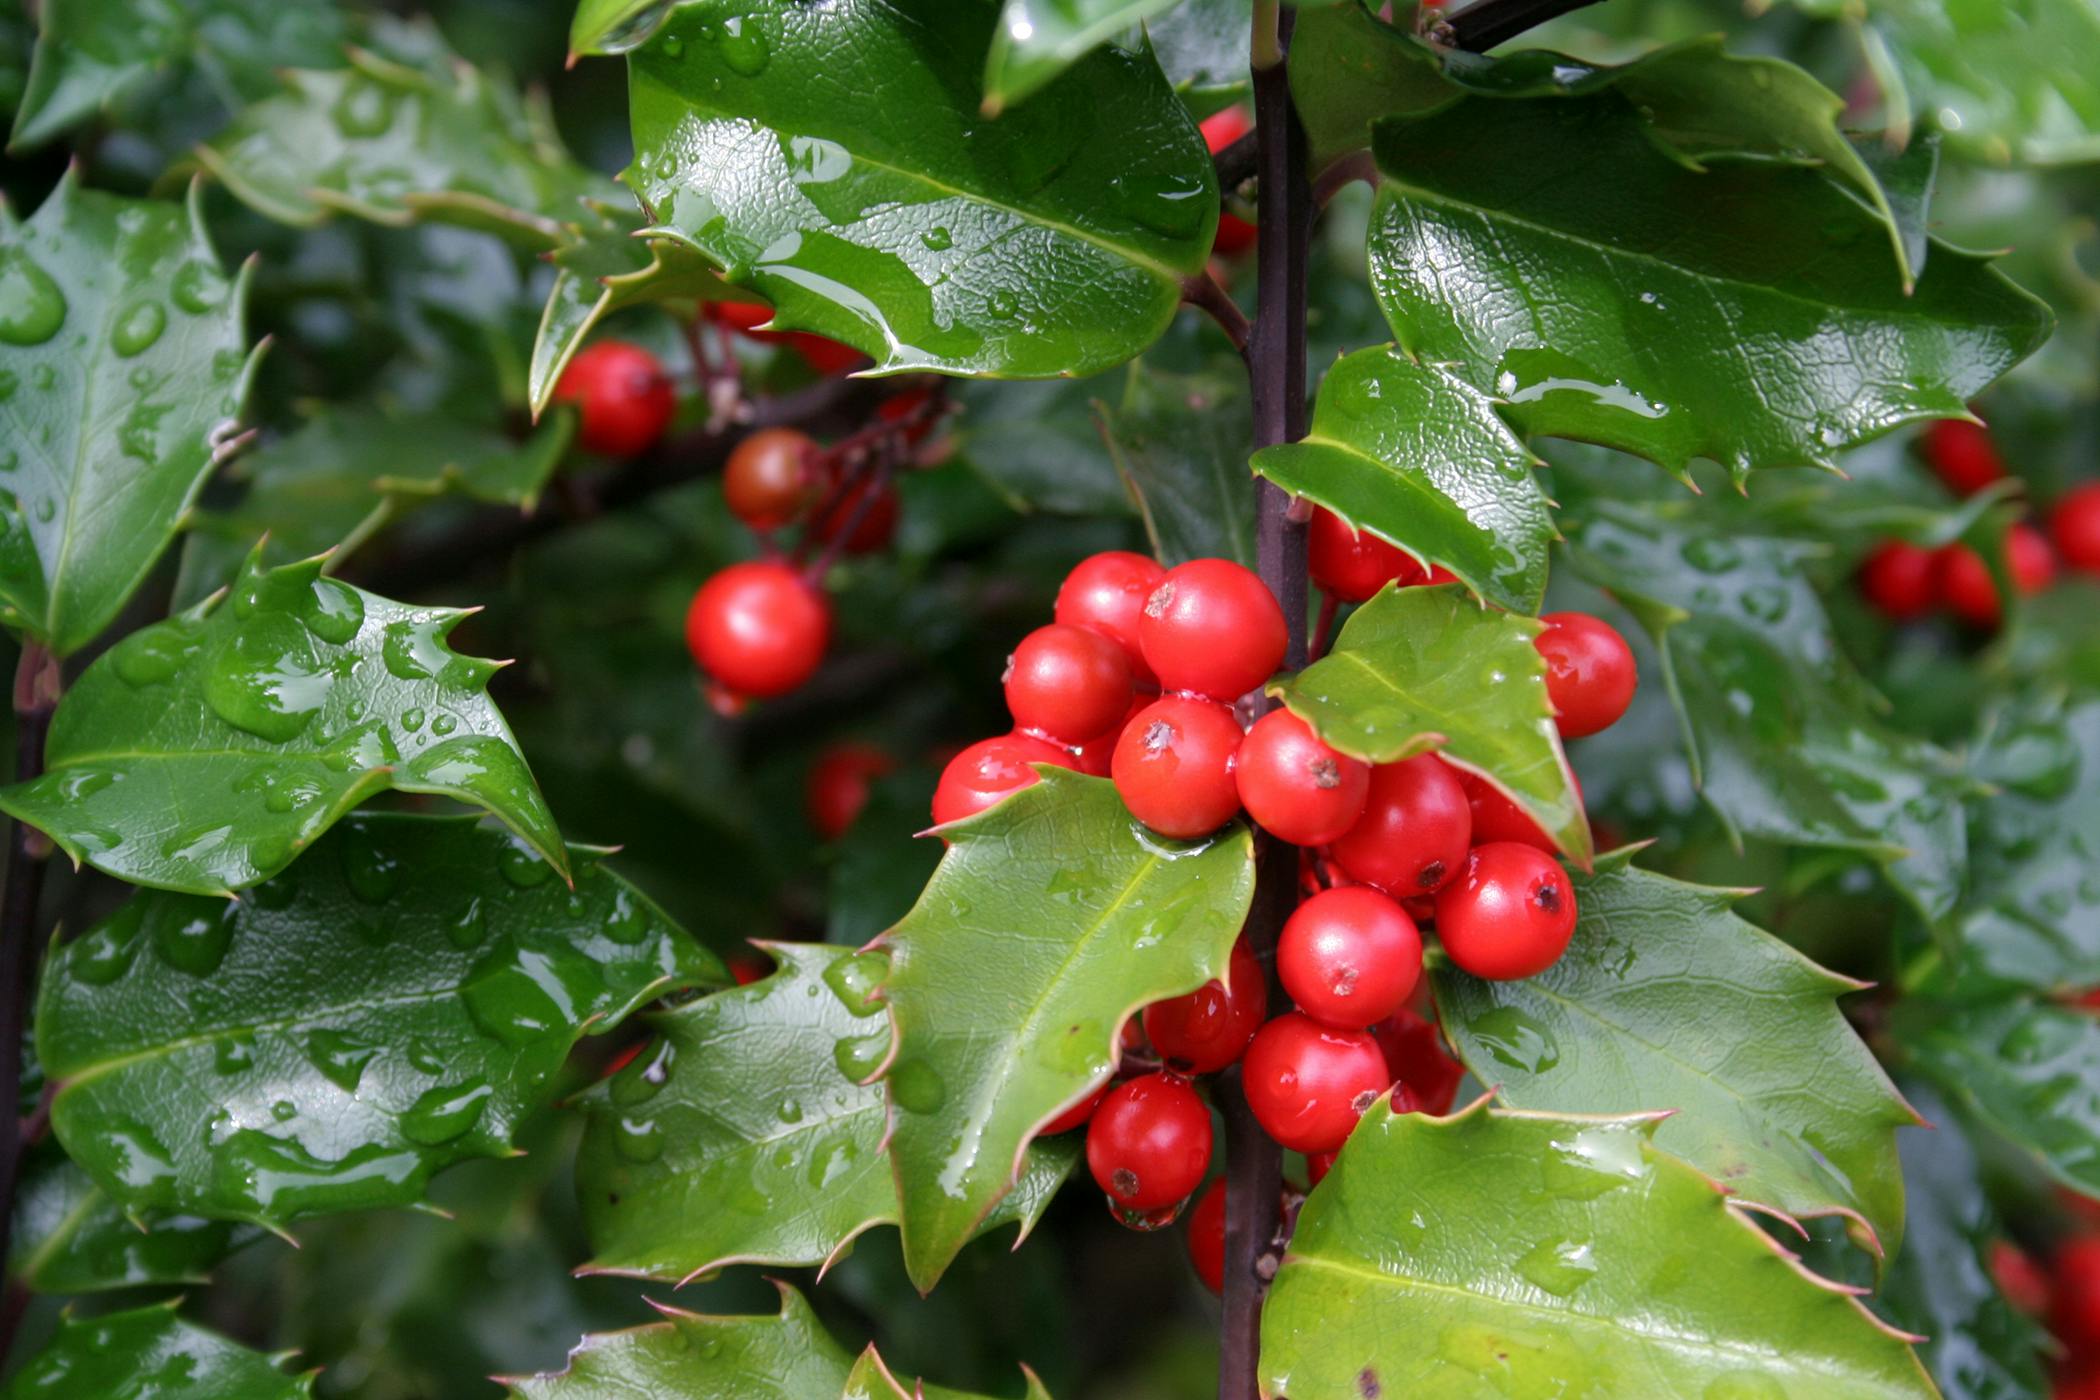 are holly plants poisonous to dogs